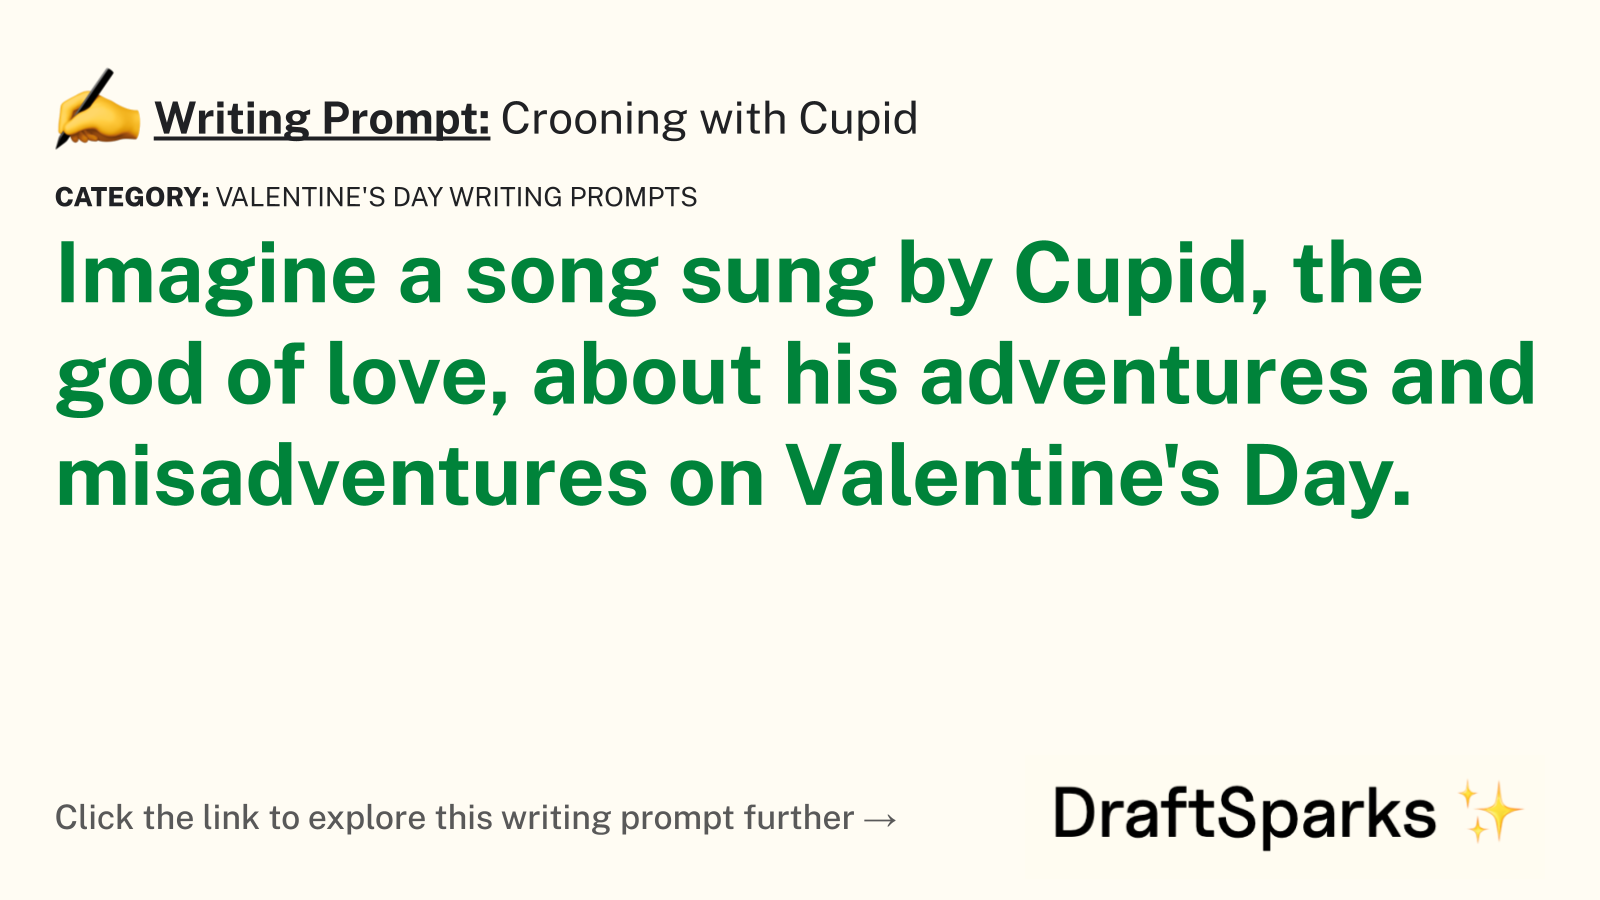 Crooning with Cupid